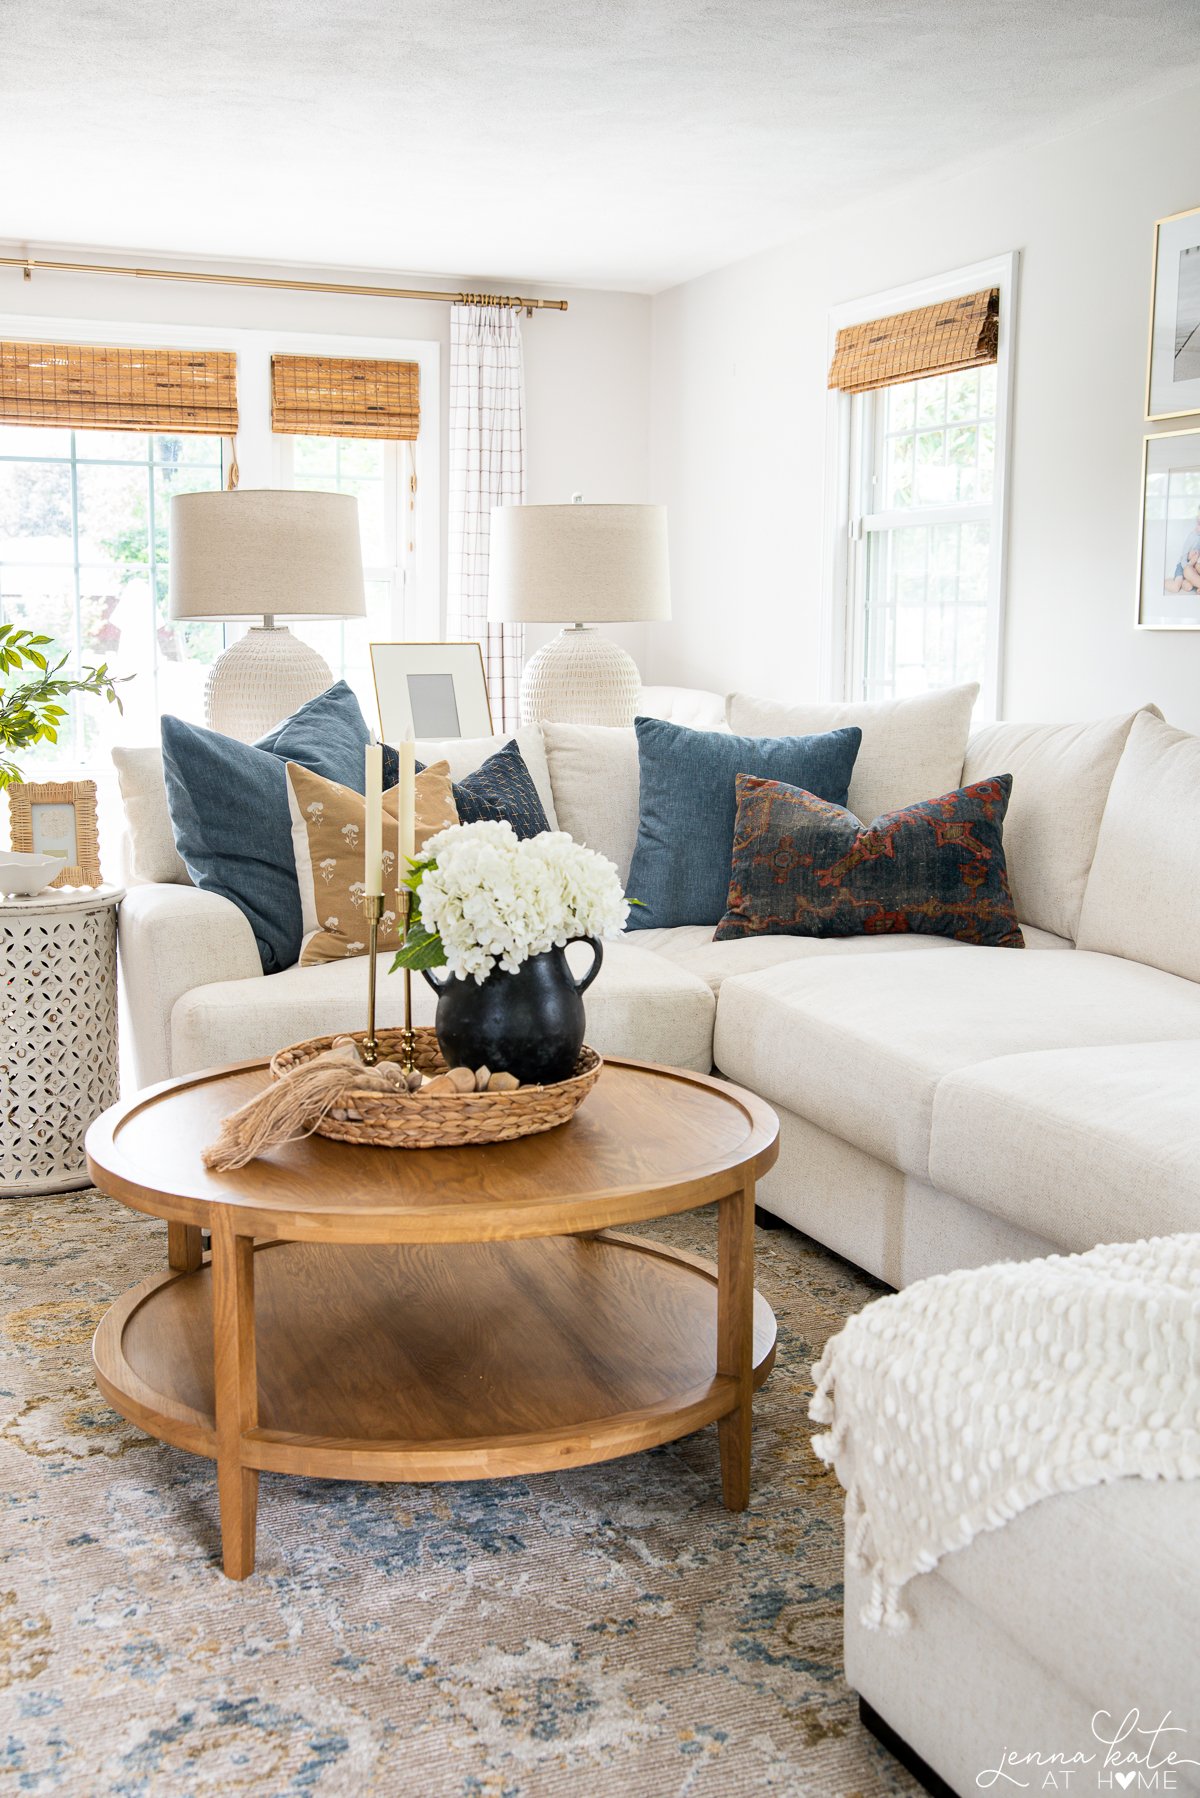 How to Combine Interior Decorating Styles in a Home